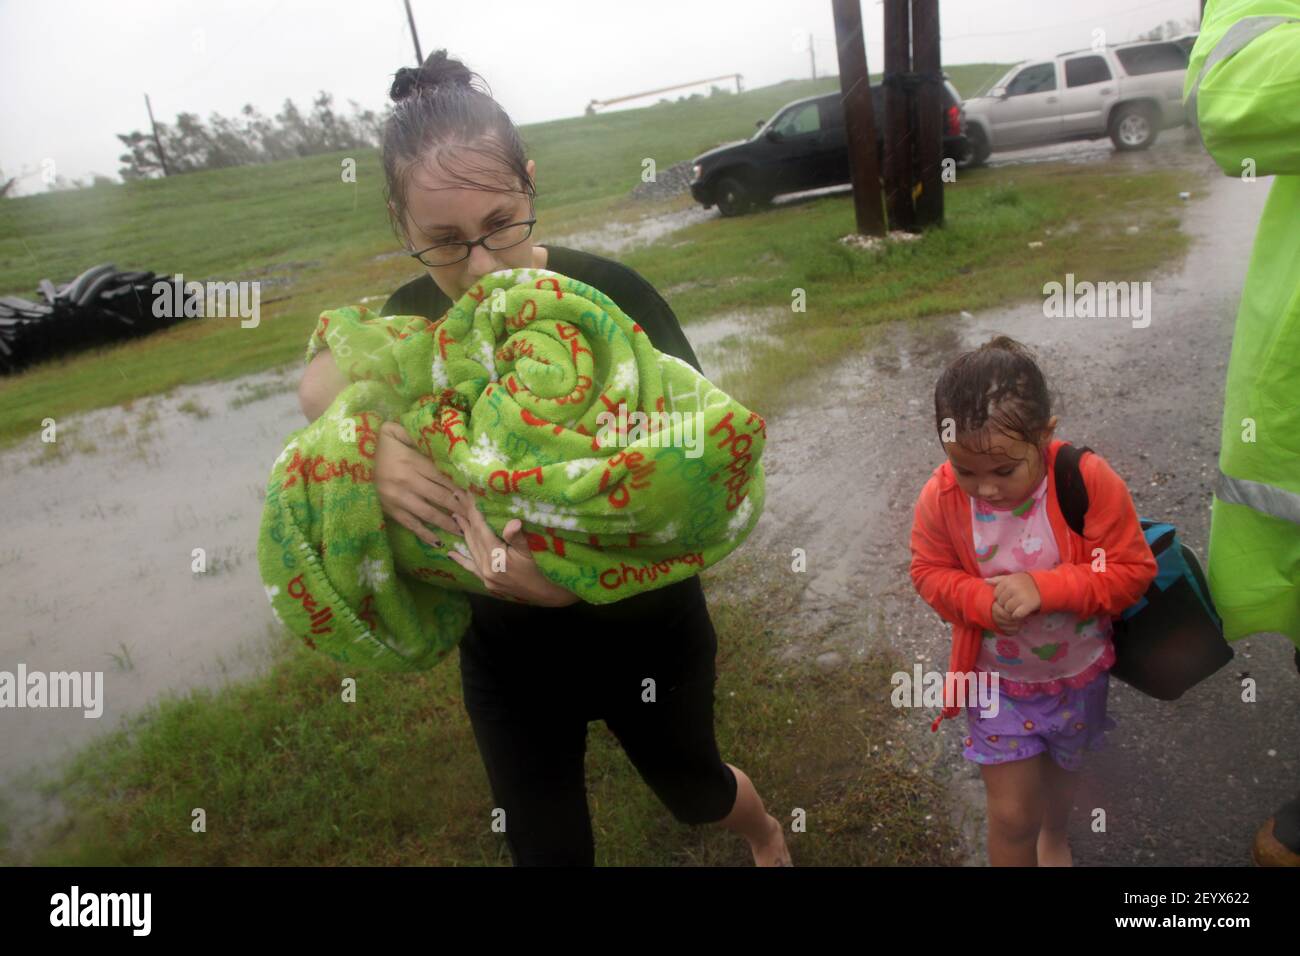 29 August 2012. Braithwaite, Plaquemines Parish, Louisiana, USA. Emergency evacuations. A young mother, her baby and daughter are rescued from the floods as hurricane Isaac batters the community of Braithwaite in Plaquemines Parish A levee was overtopped and the water gushed in, inundating peoples houses on the 7th year anniversary of Hurricane Katrina. Photo Credit: Charlie Varley/Sipa USA ***NO UK SALES*** Stock Photo